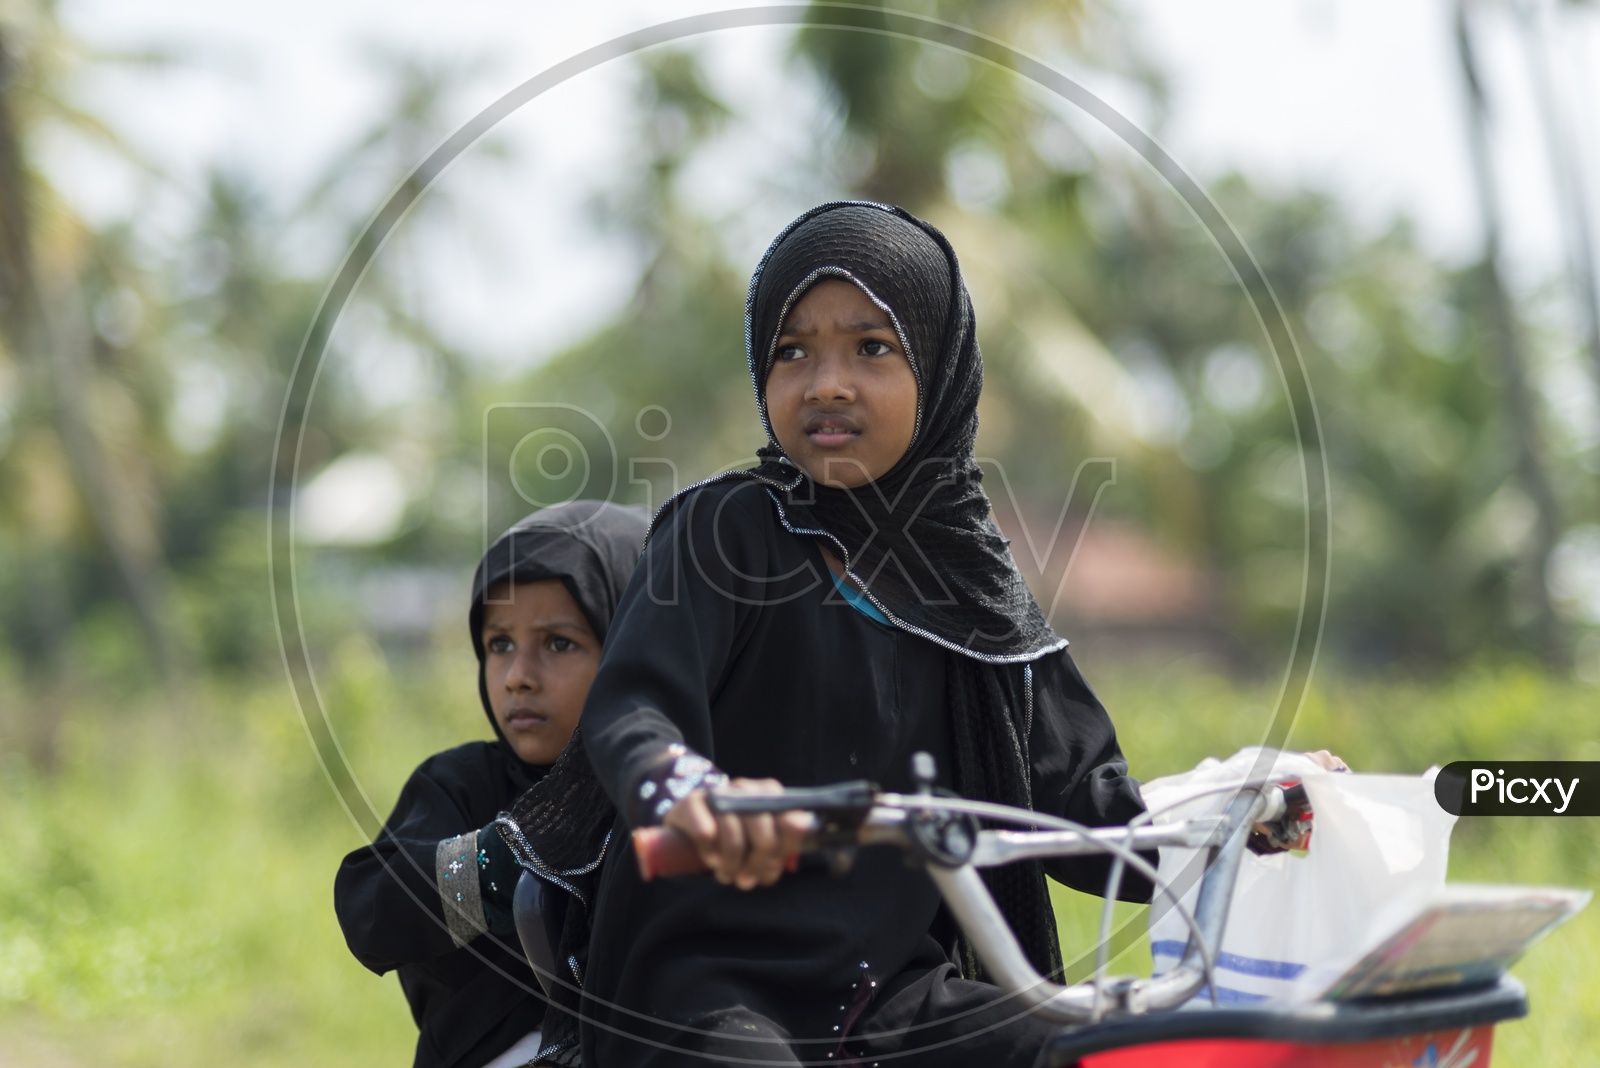 Indian Muslim Girl Child in Burkha Riding Bicycle With Her Sister on  Backside